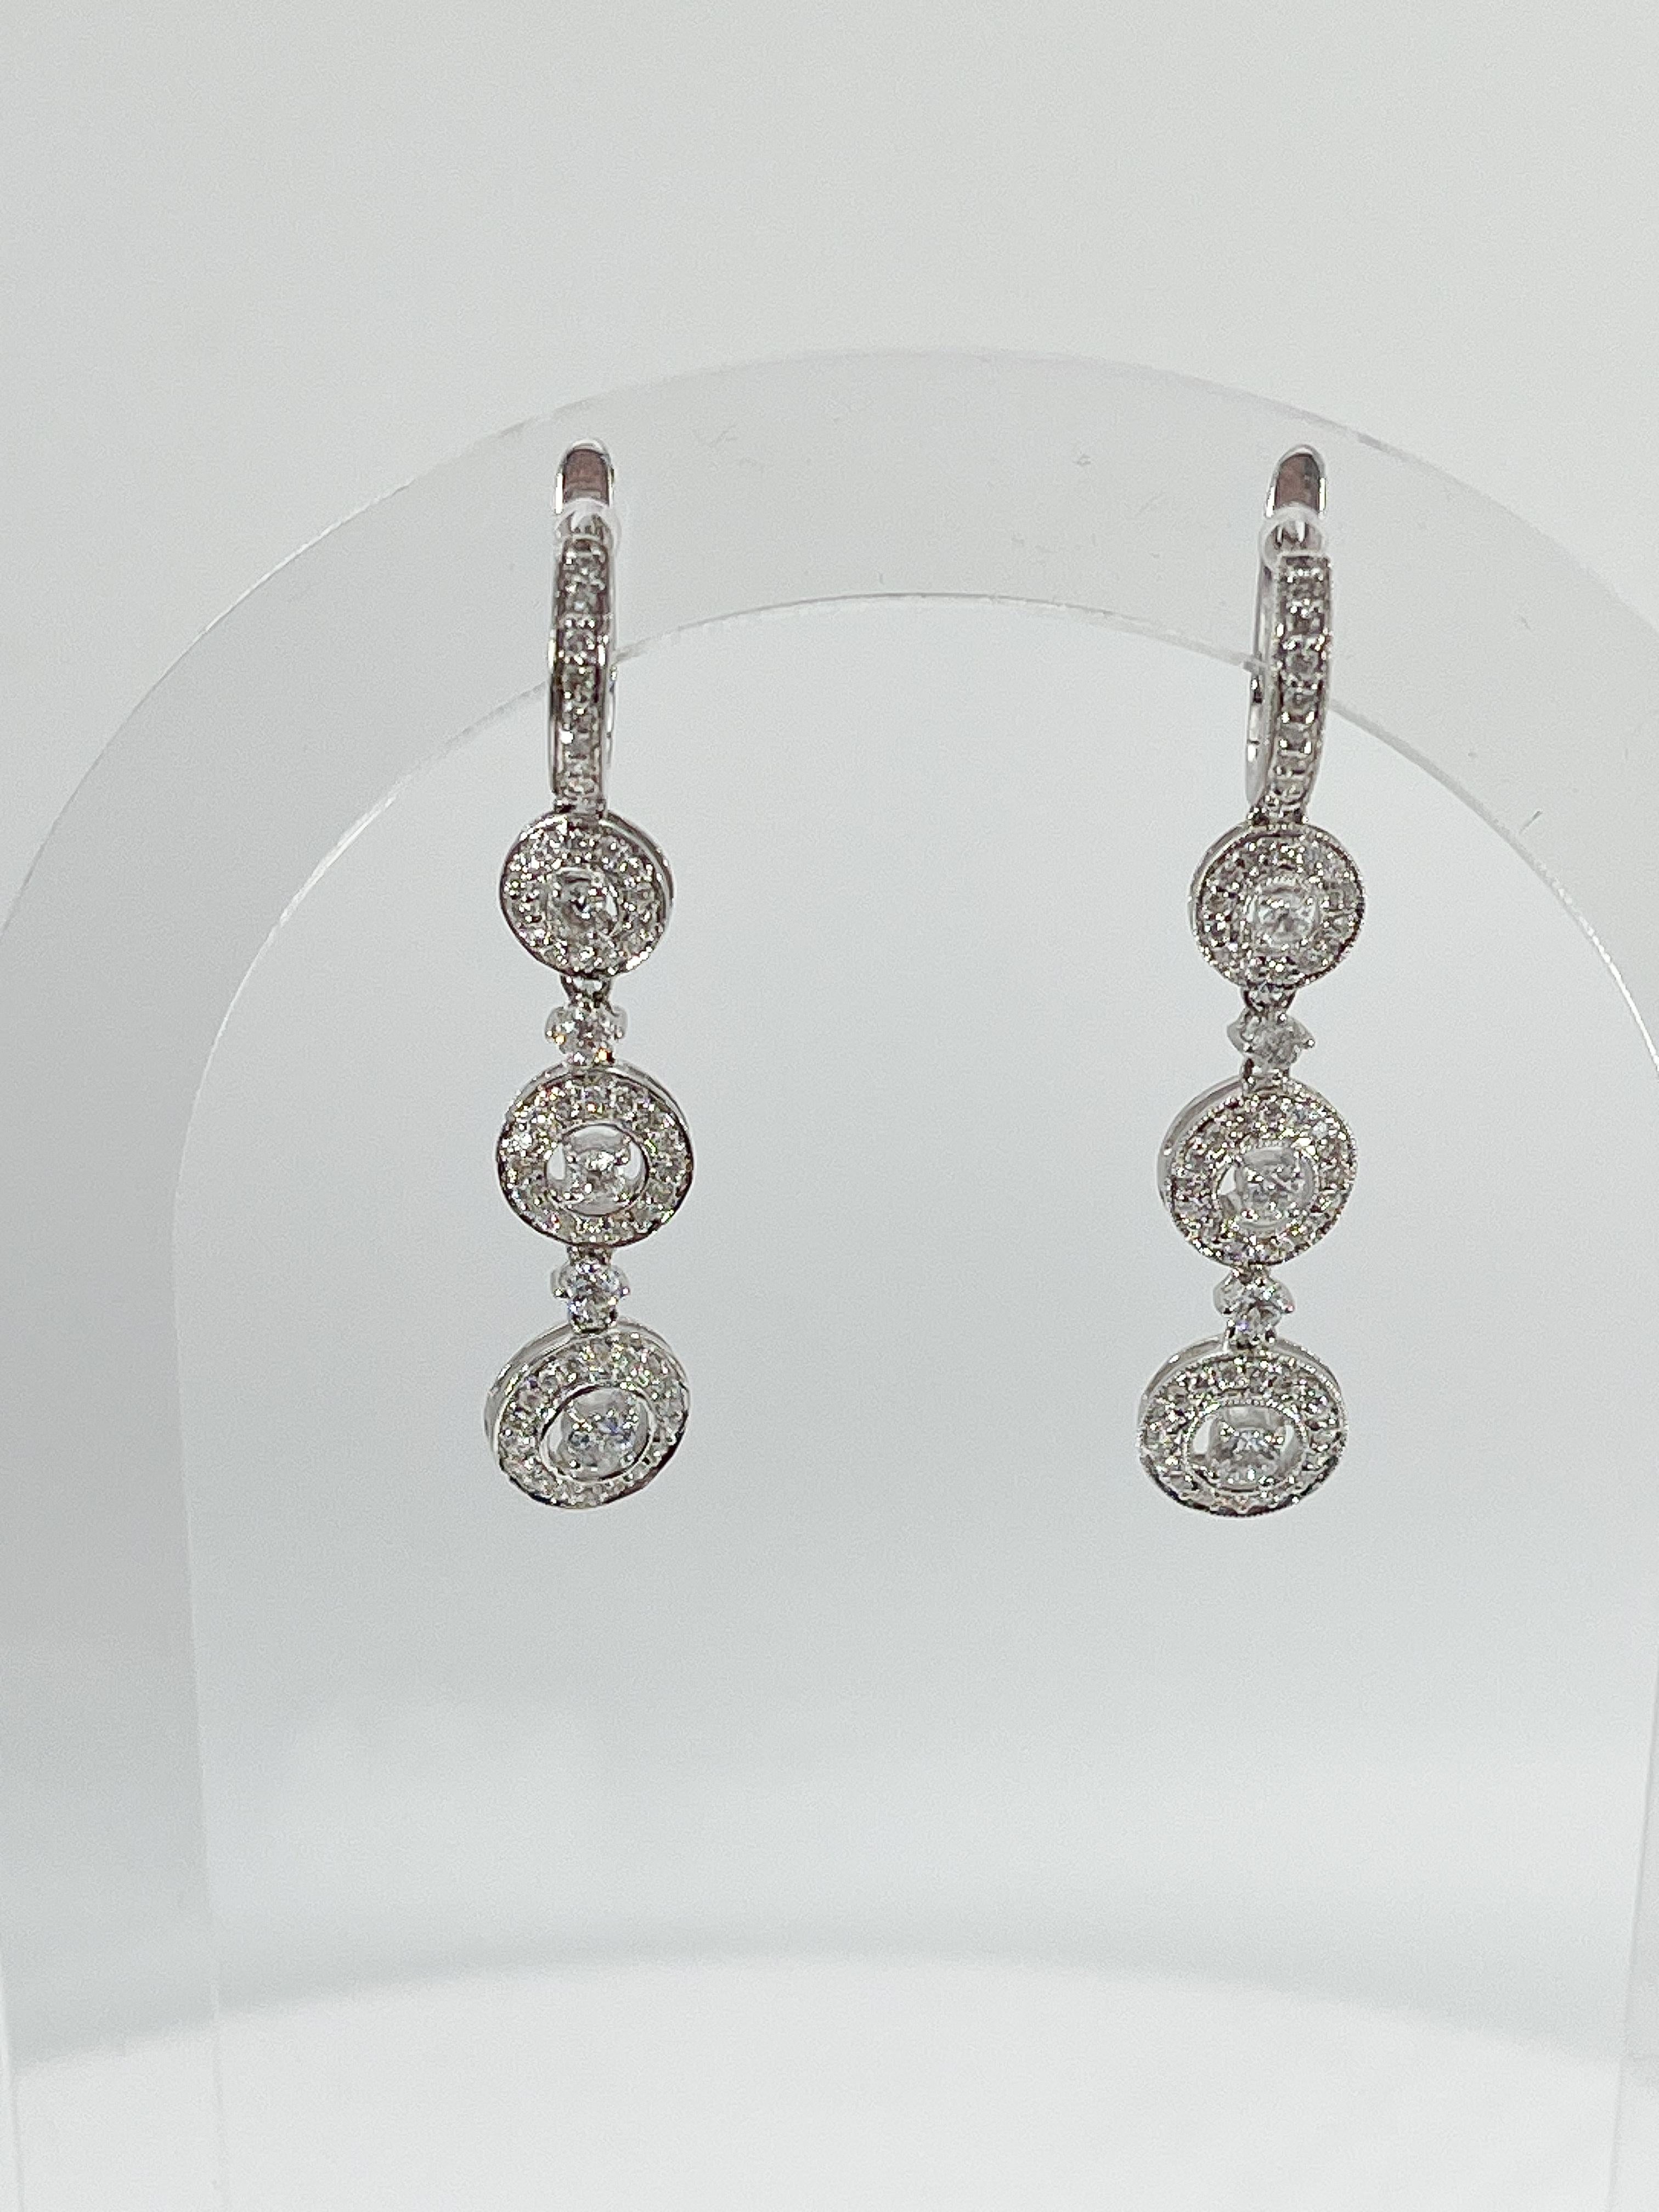 14l white gold diamond dangle earrings. The diamonds in these earrings are all round, they have a width of 8.6 mm, a length of 44 mm, and they have a total weight of 6.4 grams. 